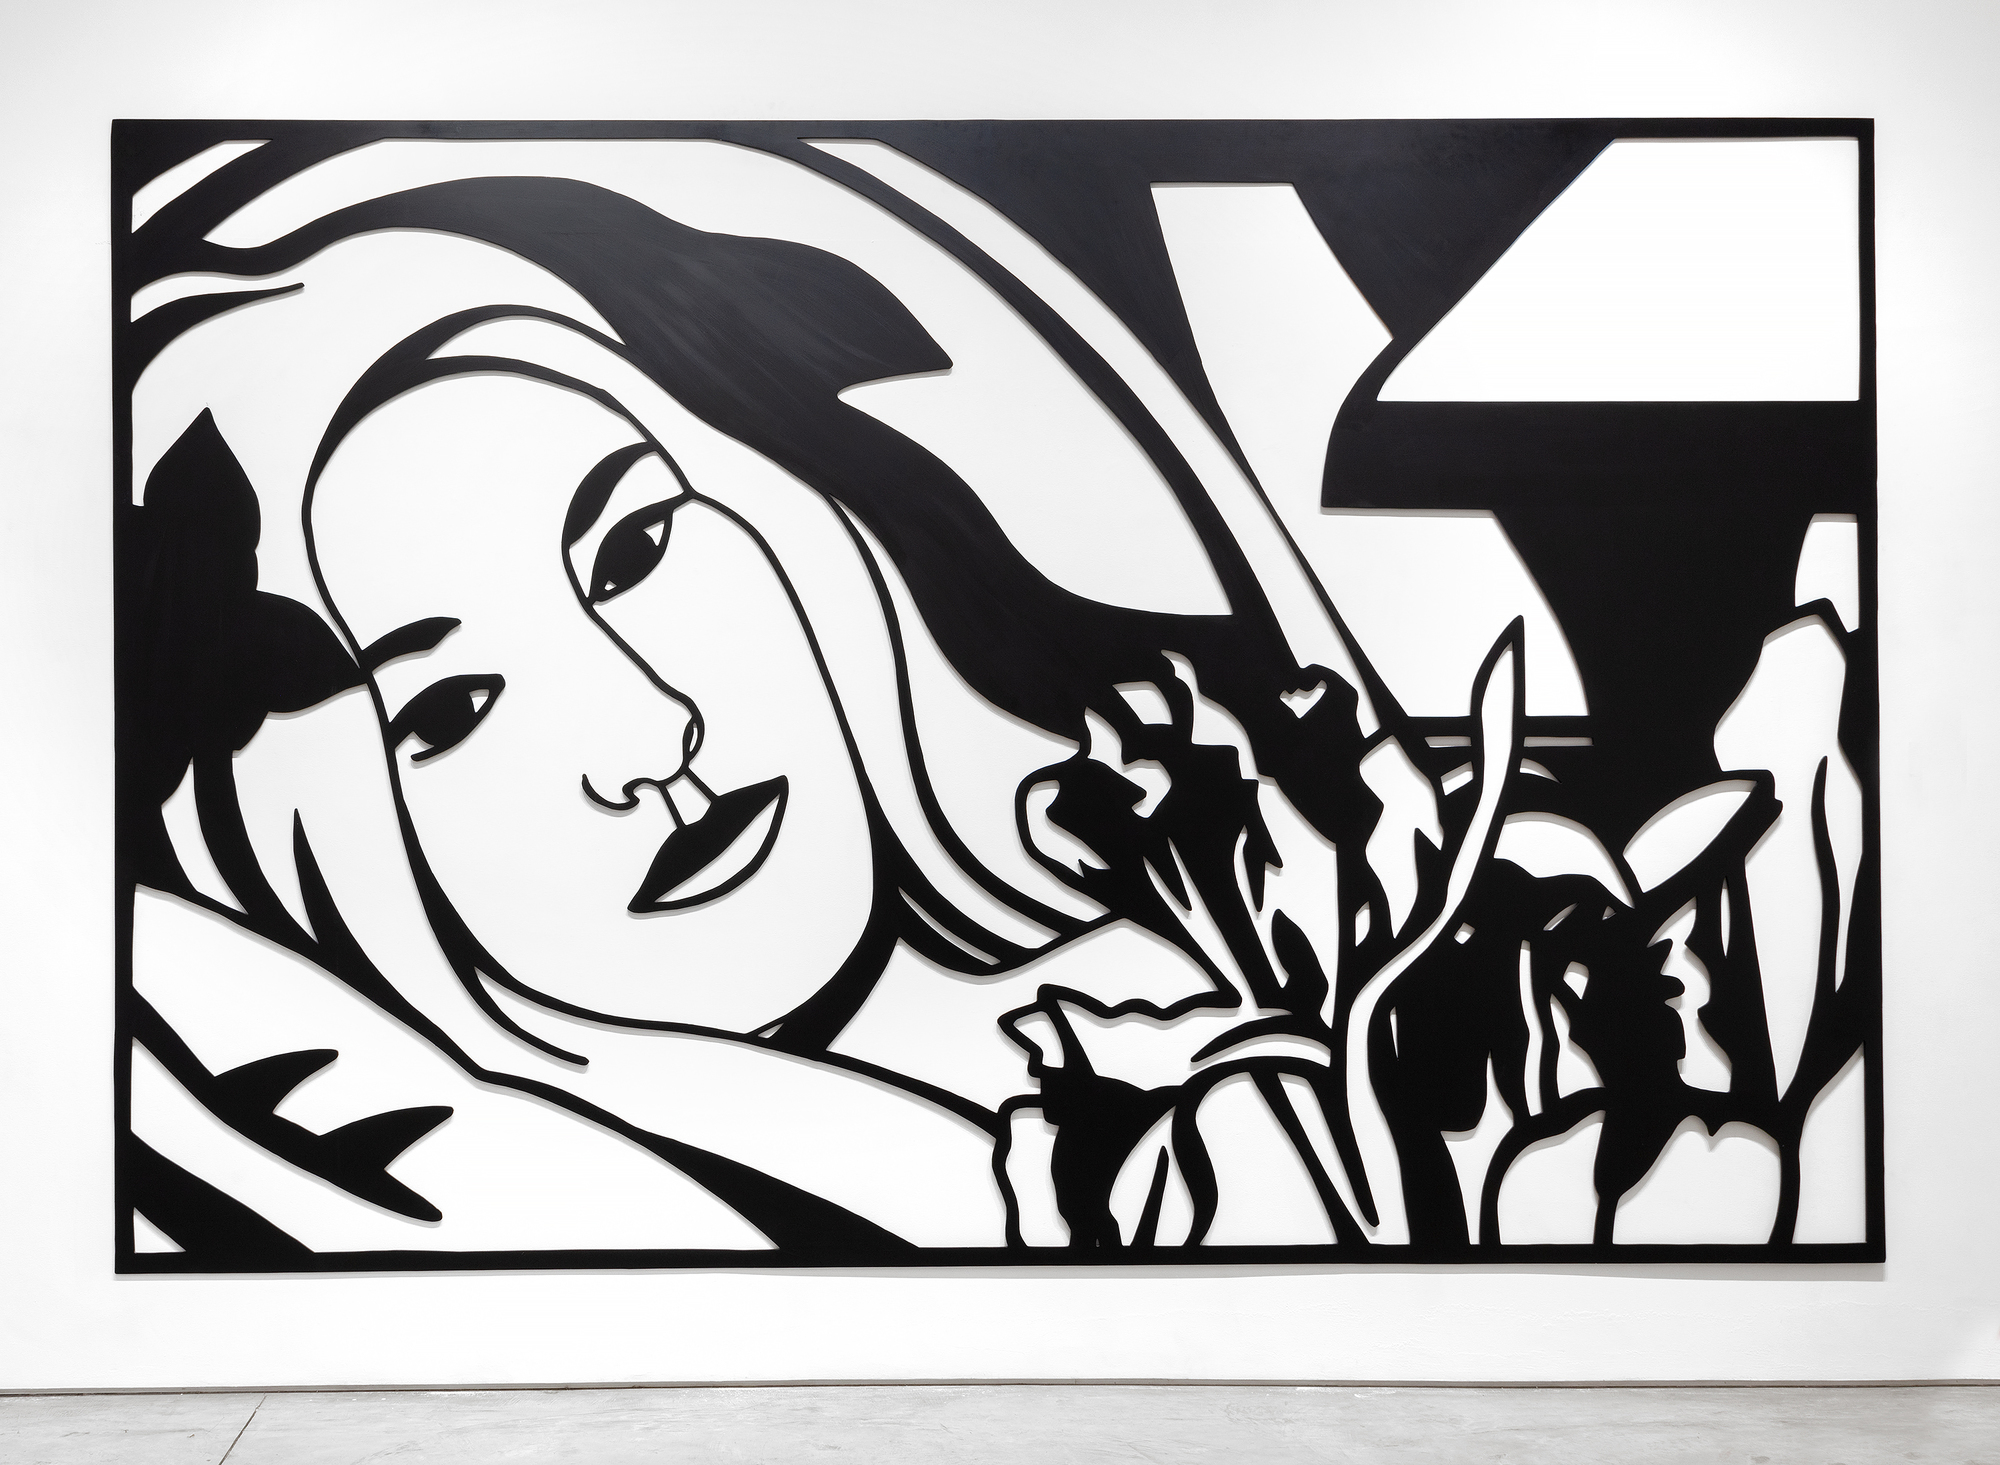 Tom Wesselmann will undoubtedly be remembered for associating his erotic themes with the colors of the American flag. But Wesselmann had considerable gifts as a draftsman, and the line was his principal preoccupation, first as a cartoonist and later as an ardent admirer of Matisse. That he also pioneered a method of turning drawings into laser-cut steel wall reliefs proved a revelation. He began to focus ever more on drawing for the sake of drawing, enchanted that the new medium could be lifted and held: “It really is like being able to pick up a delicate line drawing from the paper.”<br><br>The Steel Drawings caused both excitement and confusion in the art world. After acquiring one of the ground-breaking works in 1985, the Whitney Museum of American Art wrote Wesselmann wondering if it should be cataloged as a drawing or a sculpture. The work had caused such a stir that when Eric Fischl visited Wesselmann at his studio and saw steel-cut works for the first time, he remembered feeling jealous. He wanted to try it but dared not. It was clear: ‘Tom owned the technique completely.’<br><br>Wesselmann owed much of that technique to his year-long collaboration with metalwork fabricator Alfred Lippincott. Together, in 1984 they honed a method for cutting the steel with a laser that provided the precision he needed to show the spontaneity of his sketches. Wesselmann called it ‘the best year of my life’, elated at the results that he never fully achieved with aluminum that required each shape be hand-cut.  “I anticipated how exciting it would be for me to get a drawing back in steel. I could hold it in my hands. I could pick it up by the lines…it was so exciting…a kind of near ecstasy, anyway, but there’s really been something about the new work that grabbed me.”<br><br>Bedroom Brunette with Irises is a Steel Drawing masterwork that despite its uber-generous scale, utilizes tight cropping to provide an unimposing intimacy while maintaining a free and spontaneous quality. The figure’s outstretched arms and limbs and body intertwine with the petals and the interior elements providing a flowing investigative foray of black lines and white ‘drop out’ shapes provided by the wall. It recalls Matisse and any number of his reclining odalisque paintings. Wesselmann often tested monochromatic values to discover the extent to which color would transform his hybrid objects into newly developed Steel Drawing works and, in this case, continued with a color steel-cut version of the composition Bedroom Blonde with Irises (1987) and later still, in 1993 with a large-scale drawing in charcoal and pastel on paper.